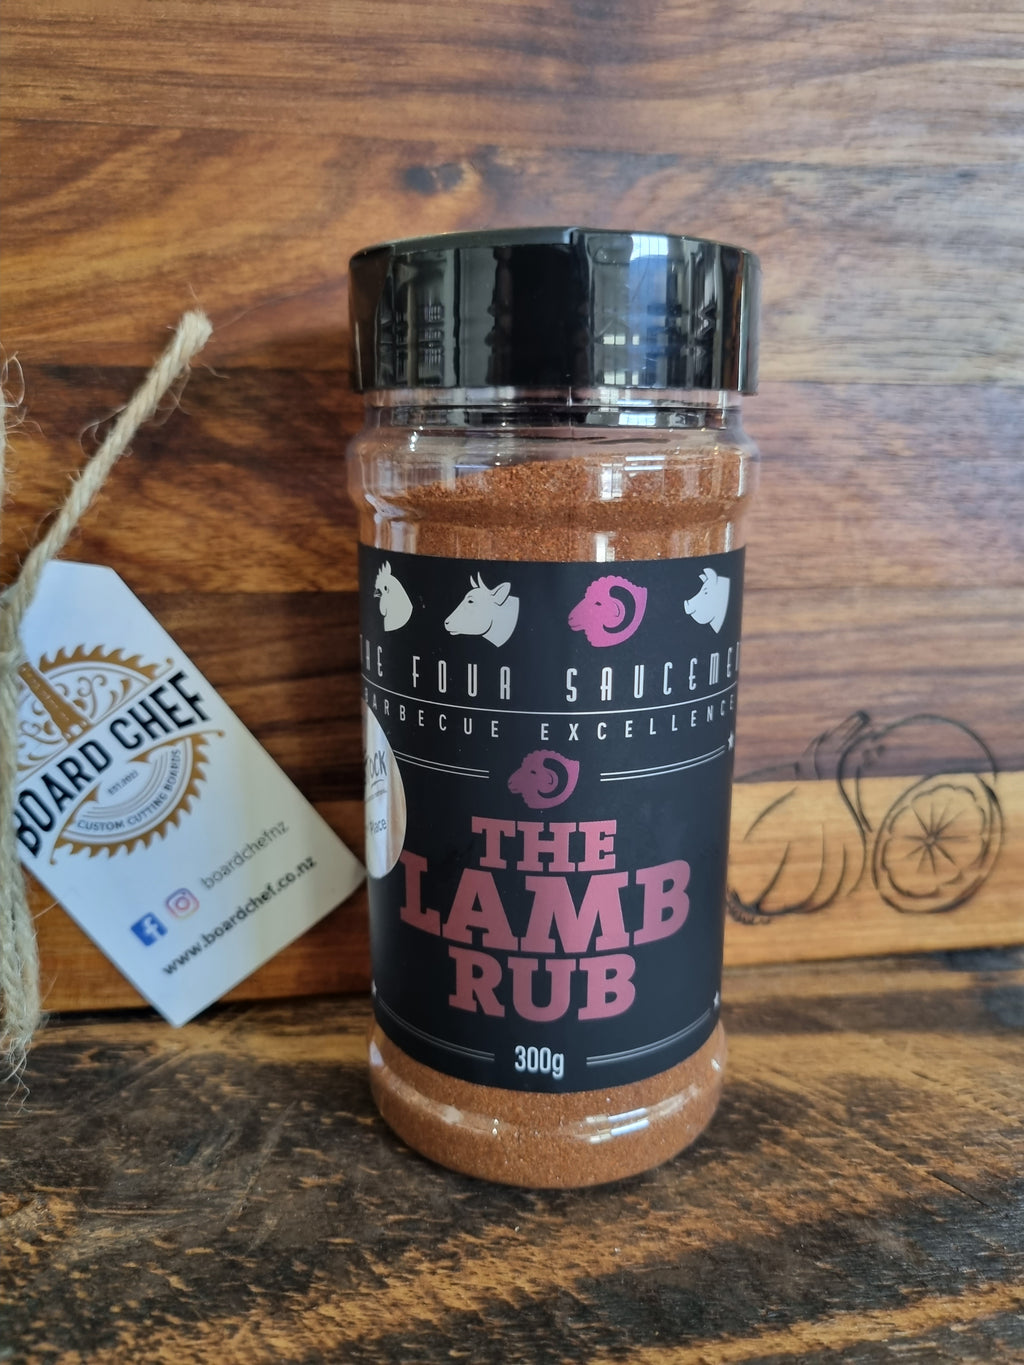 The Lamb Rub by The Four Saucemen